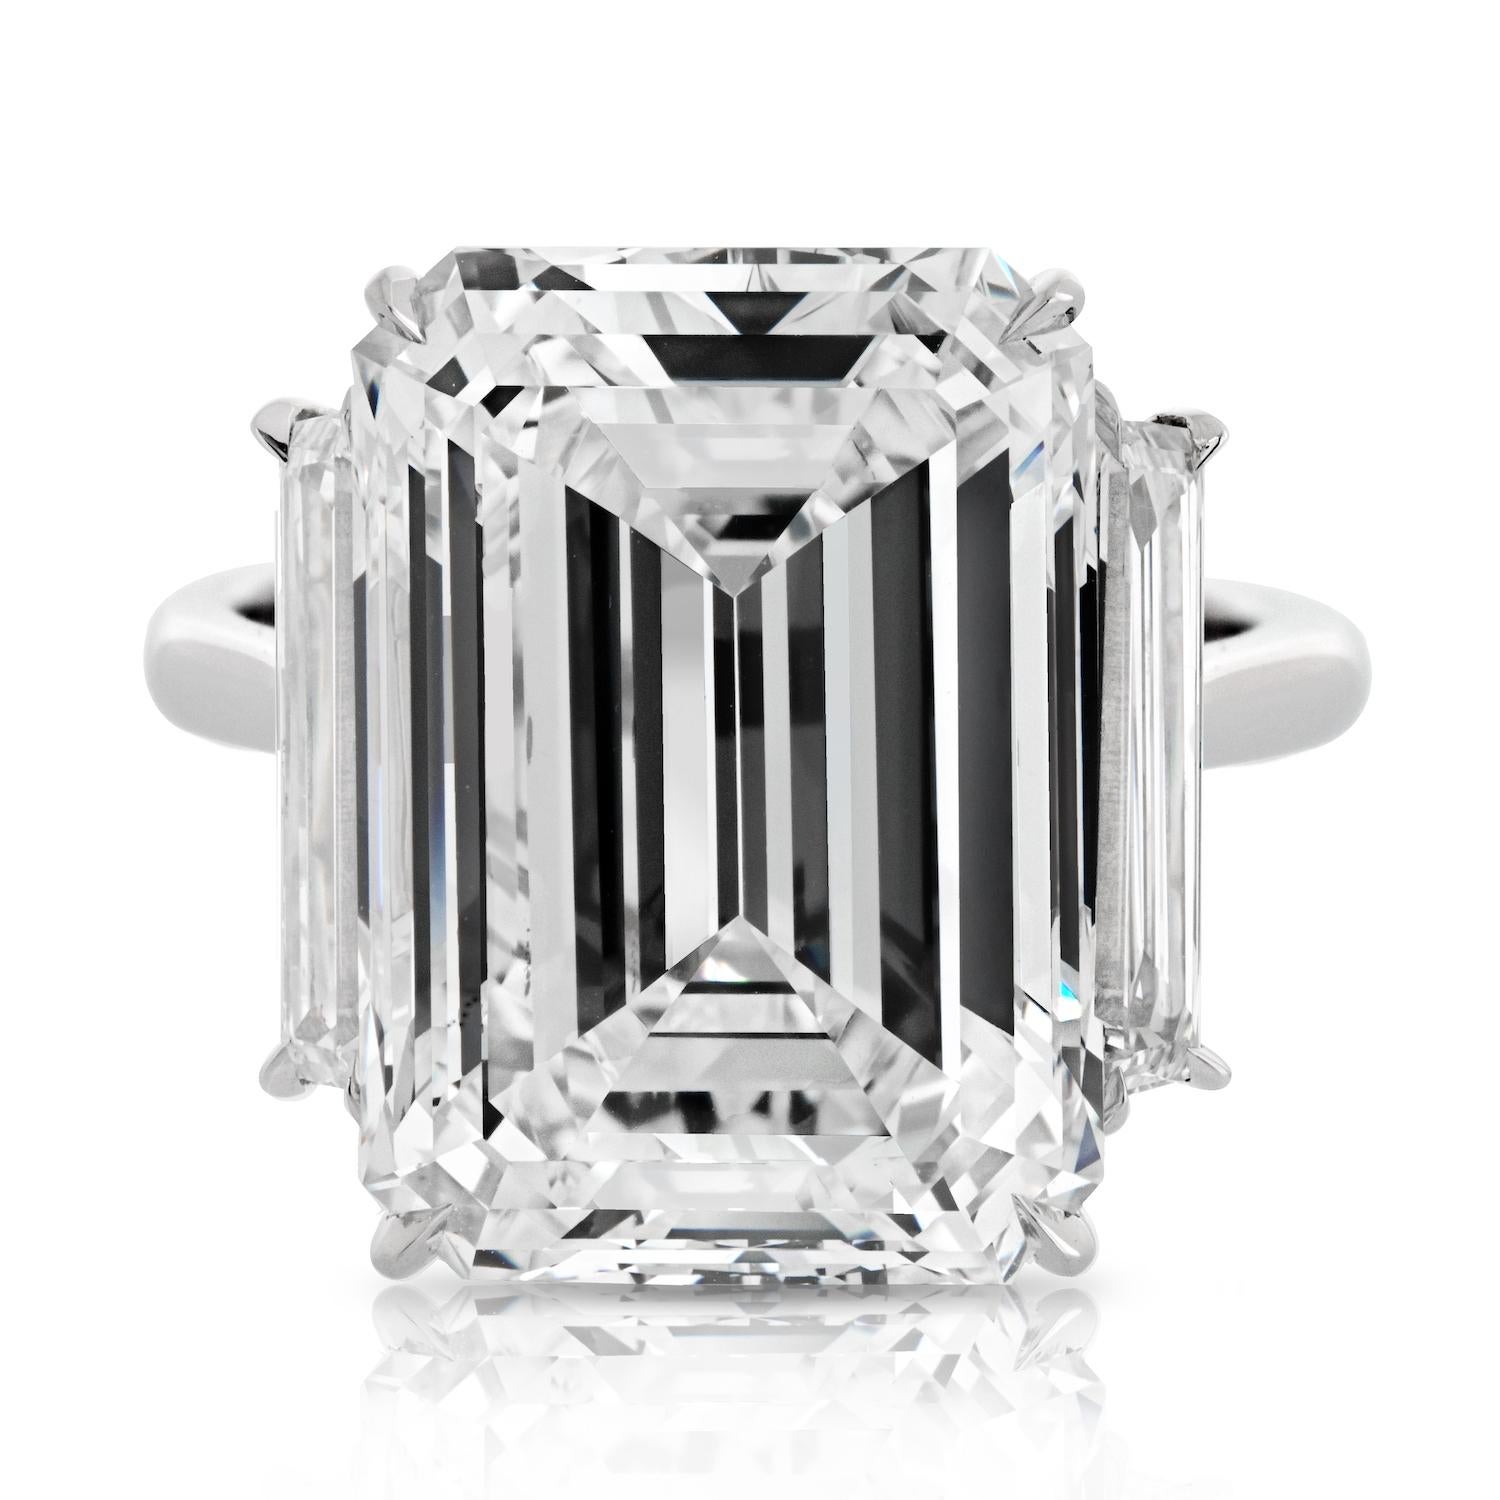 Elevate your love story with the epitome of opulence – an extraordinary engagement ring featuring a captivating 15.30-carat Emerald Cut diamond as its centerpiece. Certified by GIA, this remarkable gem boasts a rare I color grade and flawless